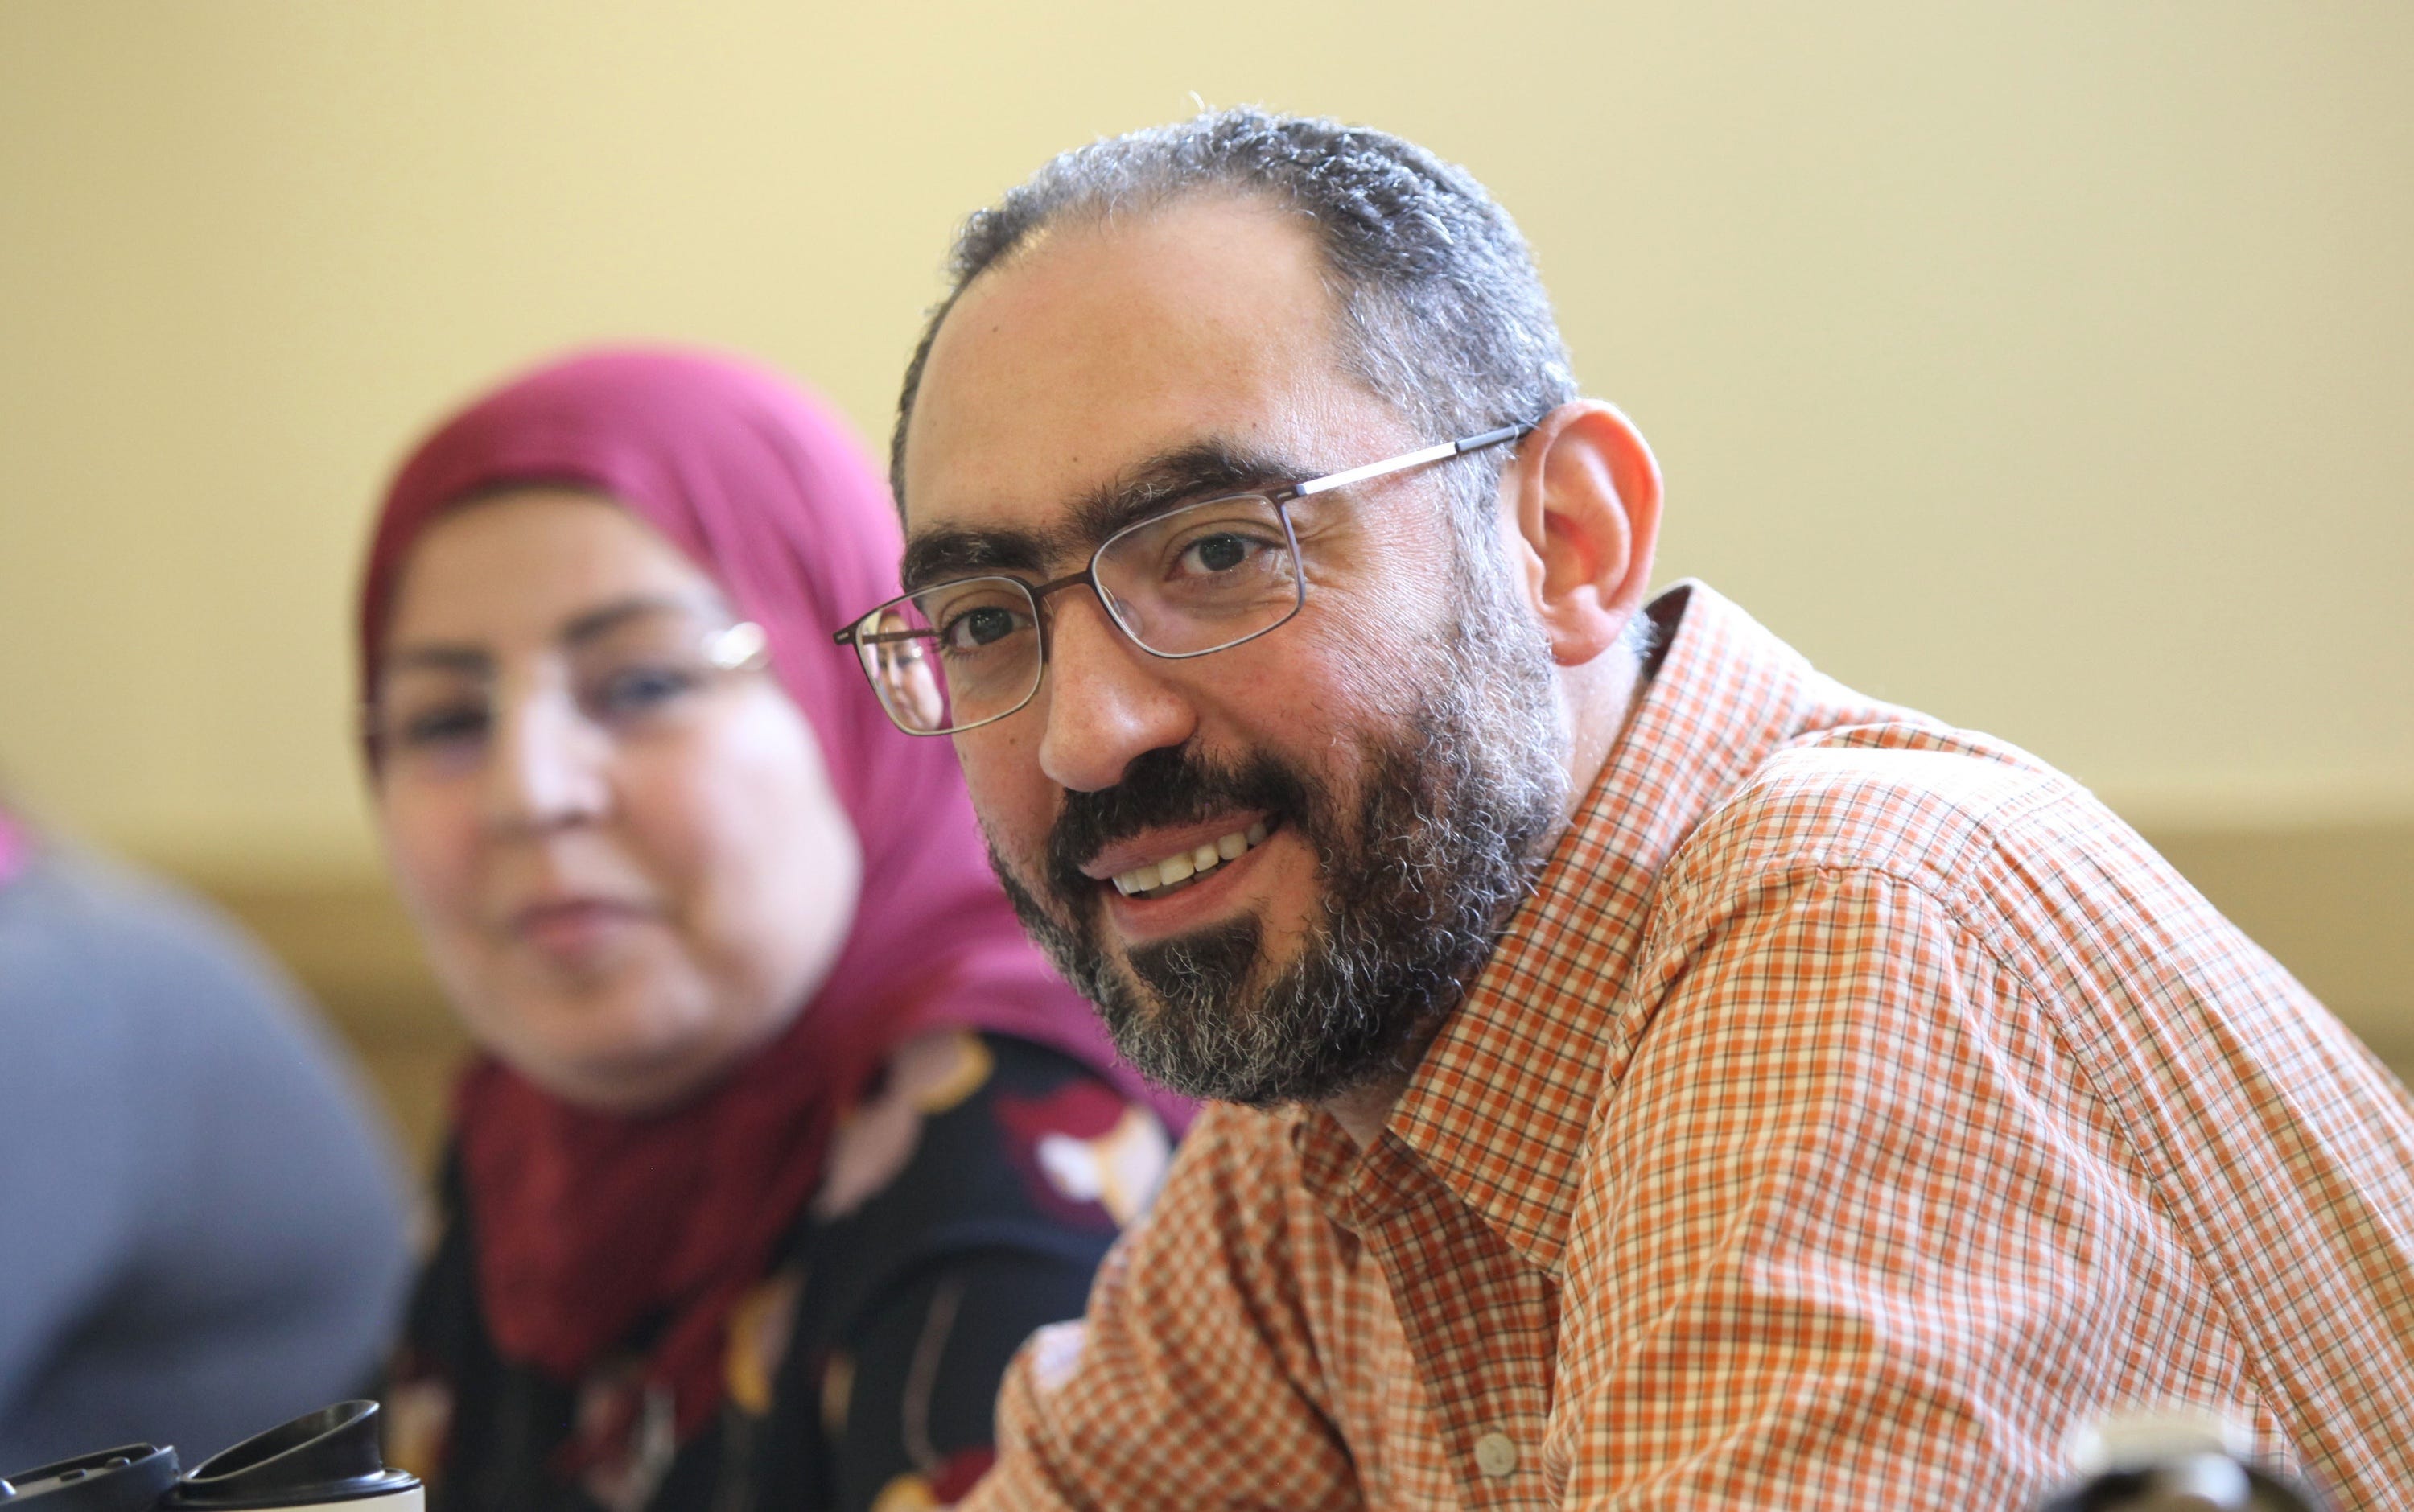 Ahmed Abdelnaby, with his wife, Dalia Elgamel, says he has witnessed growing hostility toward Muslims.